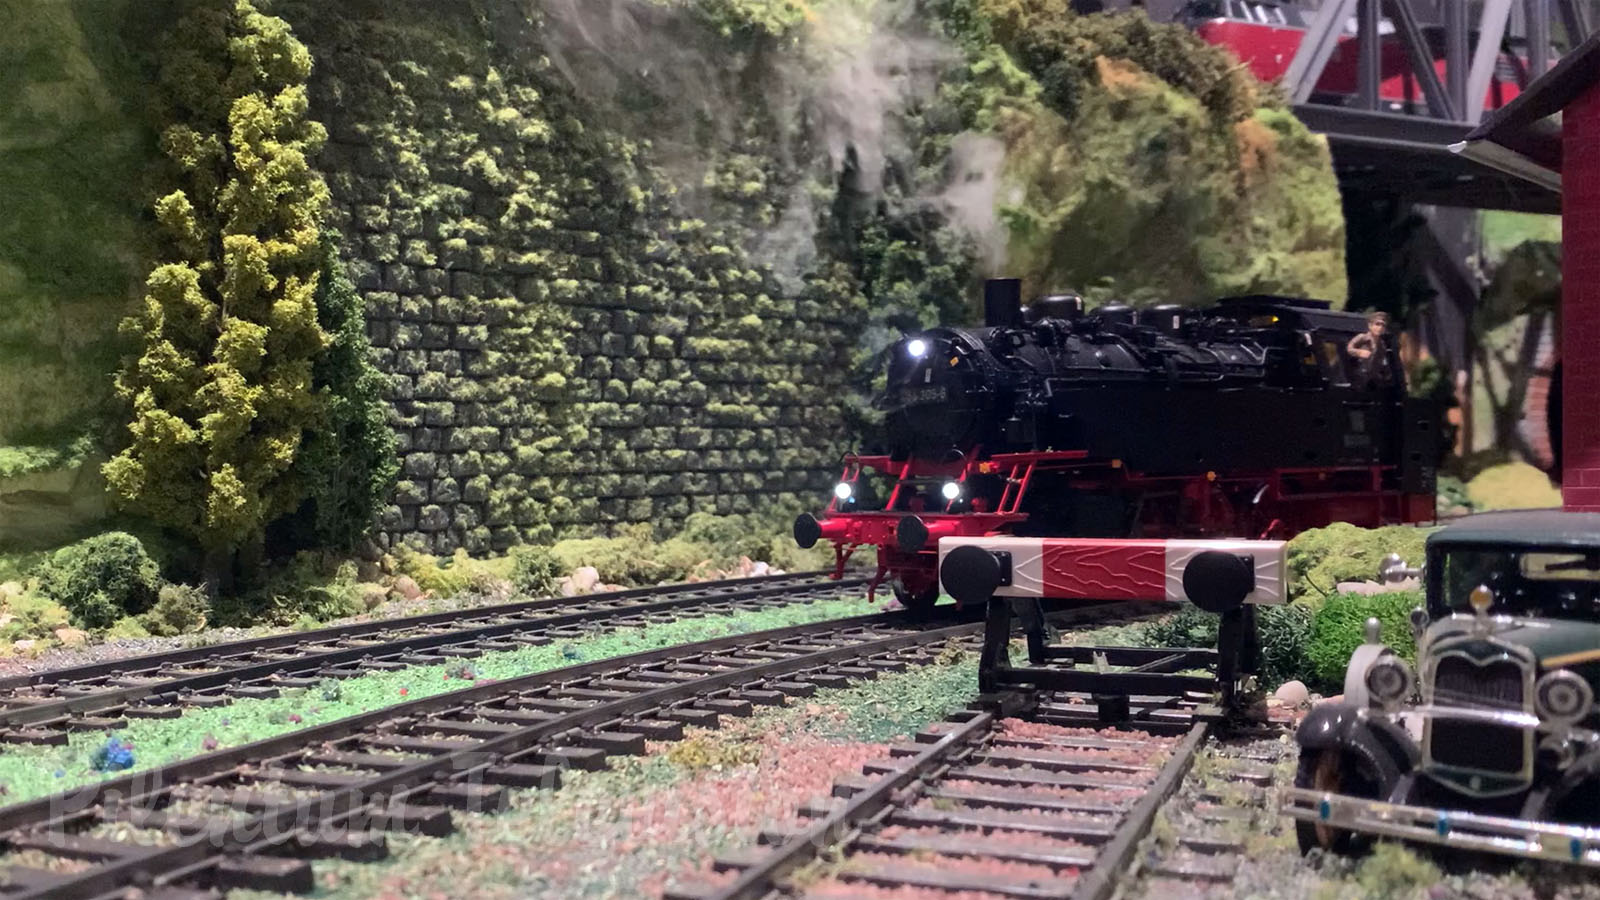 Model Railroading - Huffing, Puffing and Chuffing Steam Trains on Arnold’s Märklin Miniature Railway